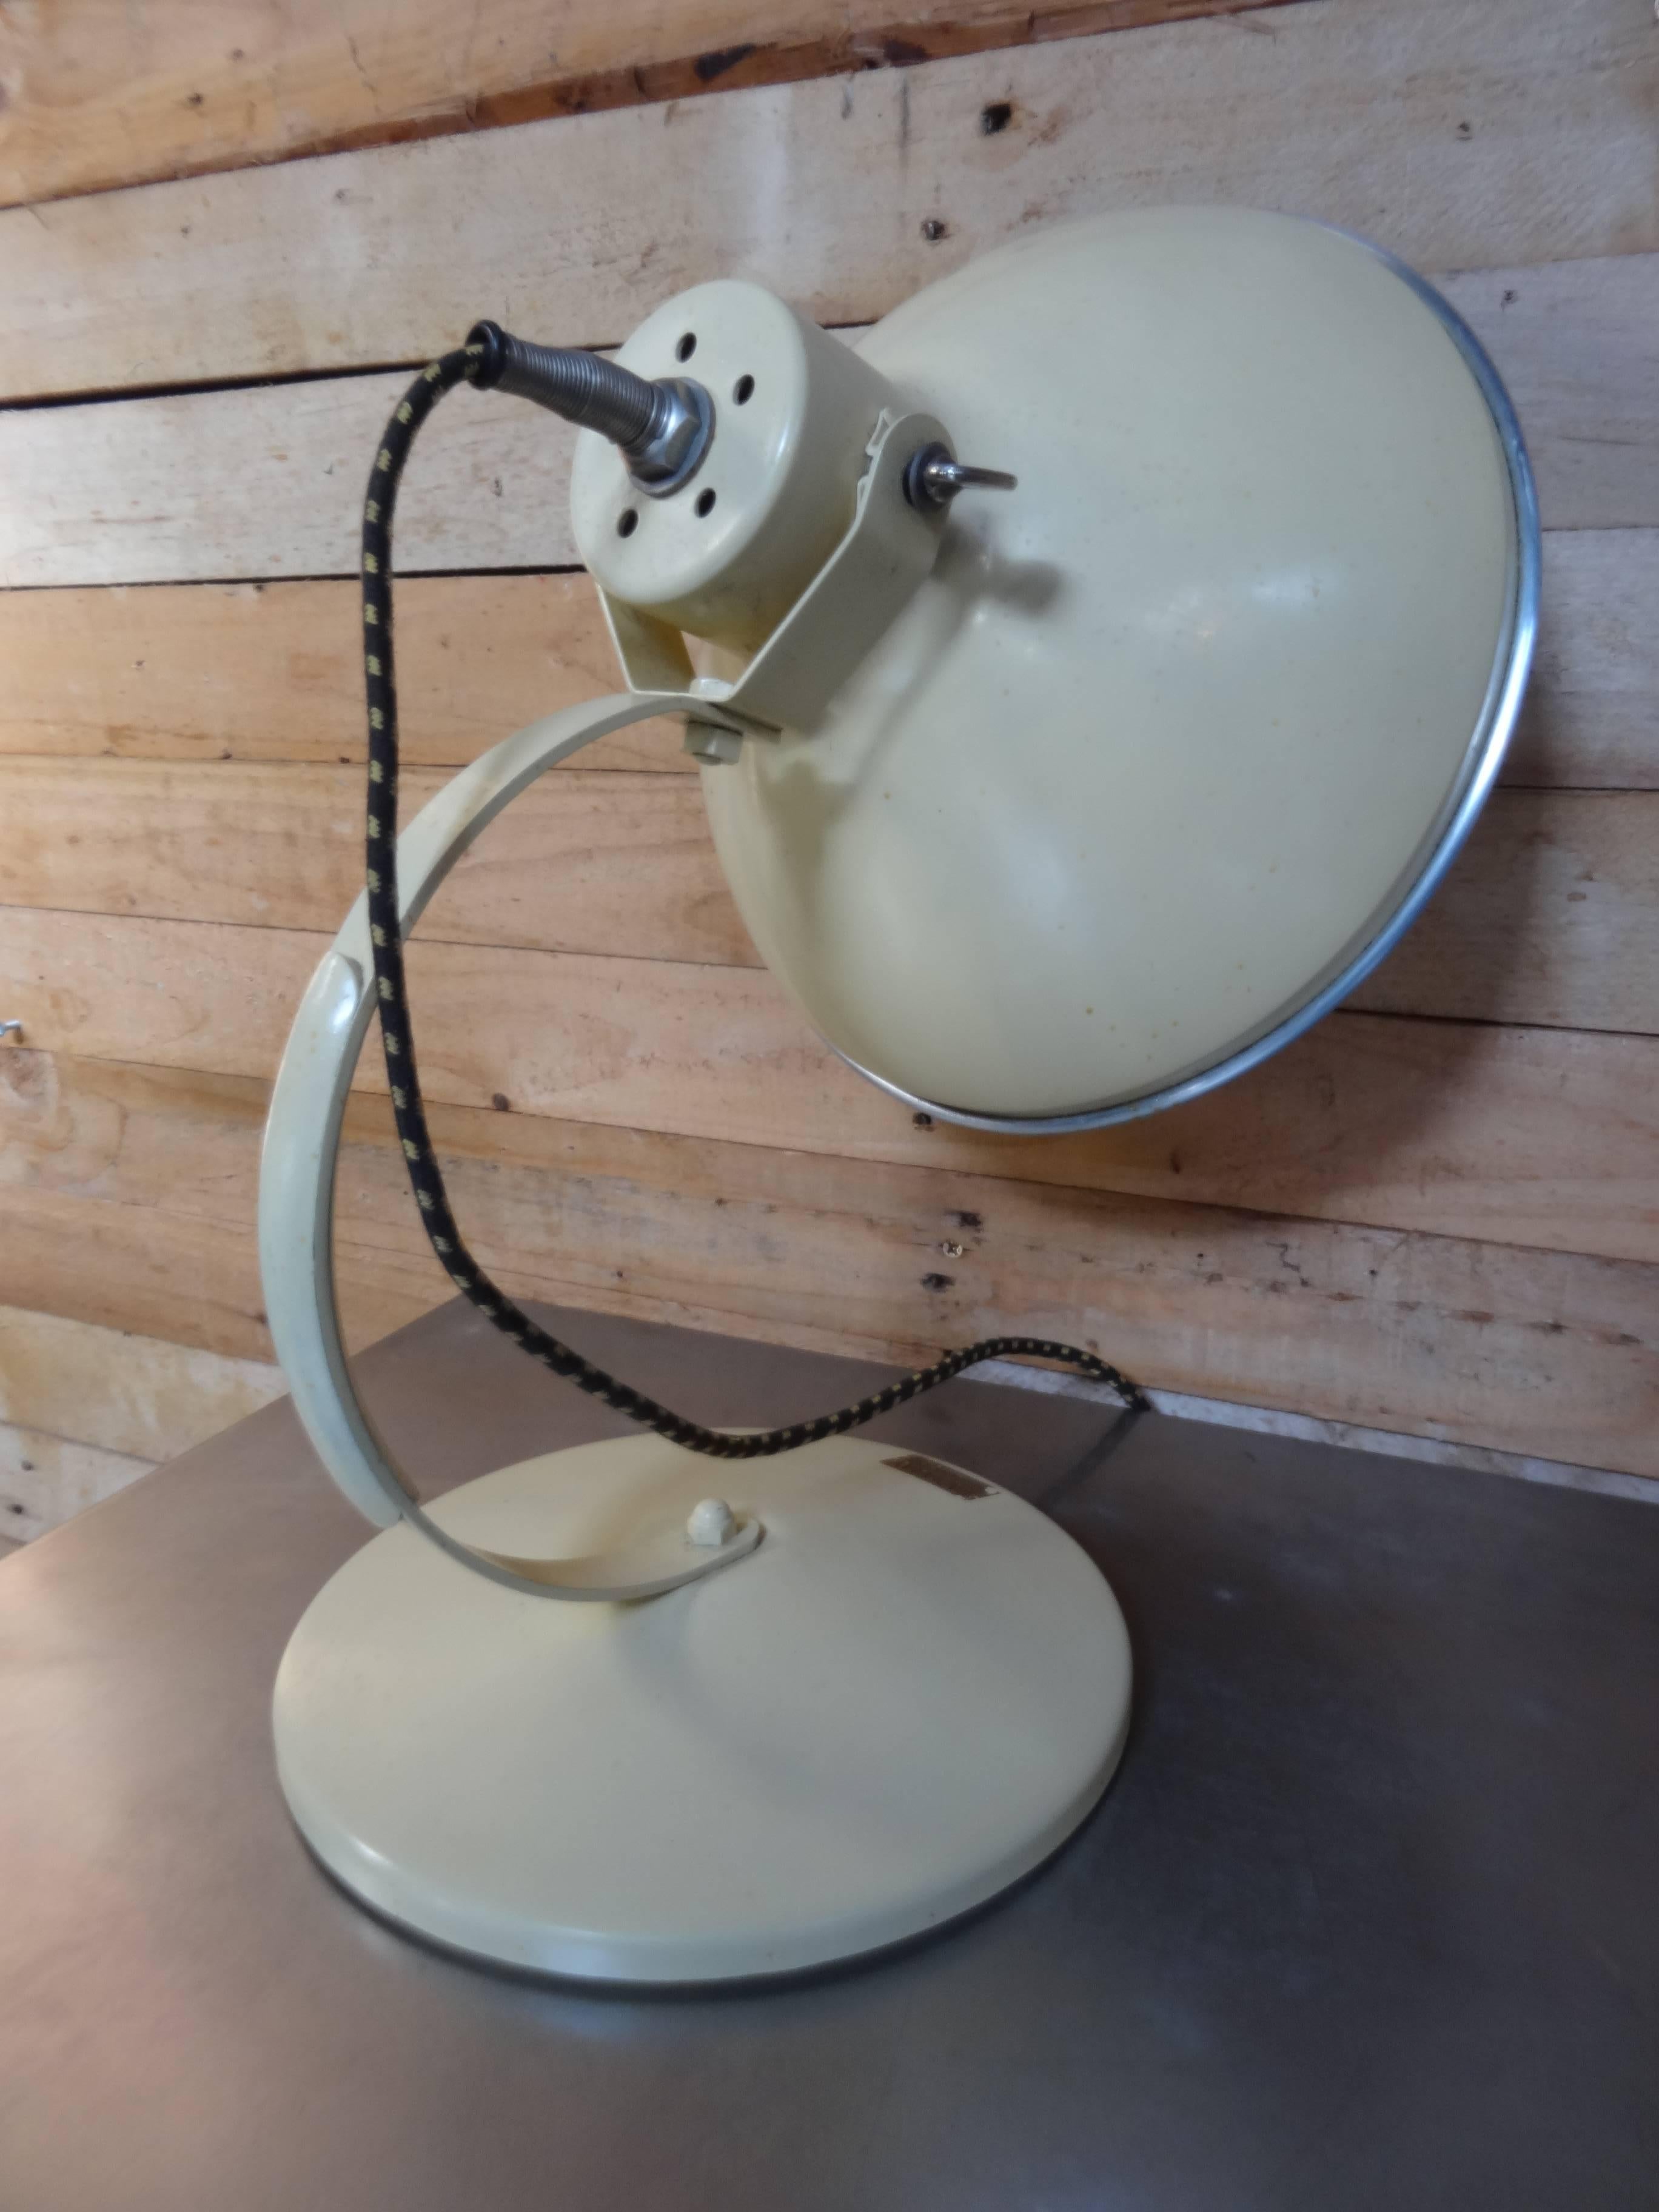 Mid-Century Modern 1950 Retro Vintage English Hospital Table or Desk Light English Made by Hinders For Sale